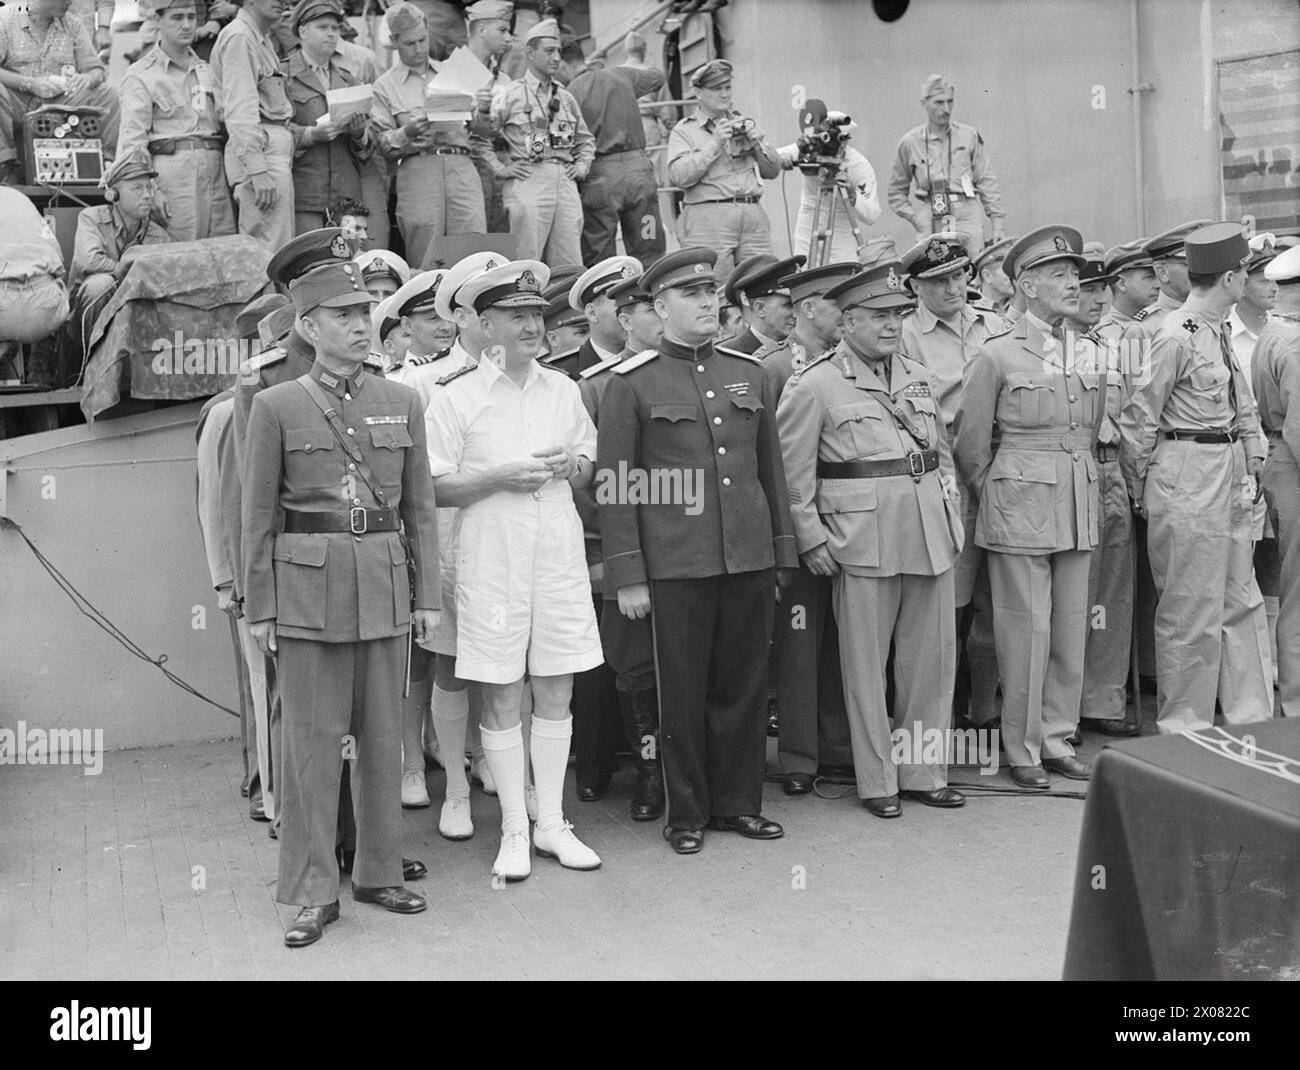 JAPANESE SURRENDER AT TOKYO BAY, 2 SEPTEMBER 1945 - Representatives of the Allied powers wait to sign the Instrument of Surrender on board USS MISSOURI. From left to right: General Hsu-Yung-Chang (China), Admiral Sir Bruce Fraser (Great Britain), Lieutenant General Kusa Nickolsevitch Derevyenko (USSR), General Sir Thomas Blaney (Australia), Colonel L Moore Cosgrave (Canada) and General Le Clerc (Provisional Government of France)  Fraser, Bruce Austin, United States Navy, USS Missouri, Battleship, (1944) Stock Photo